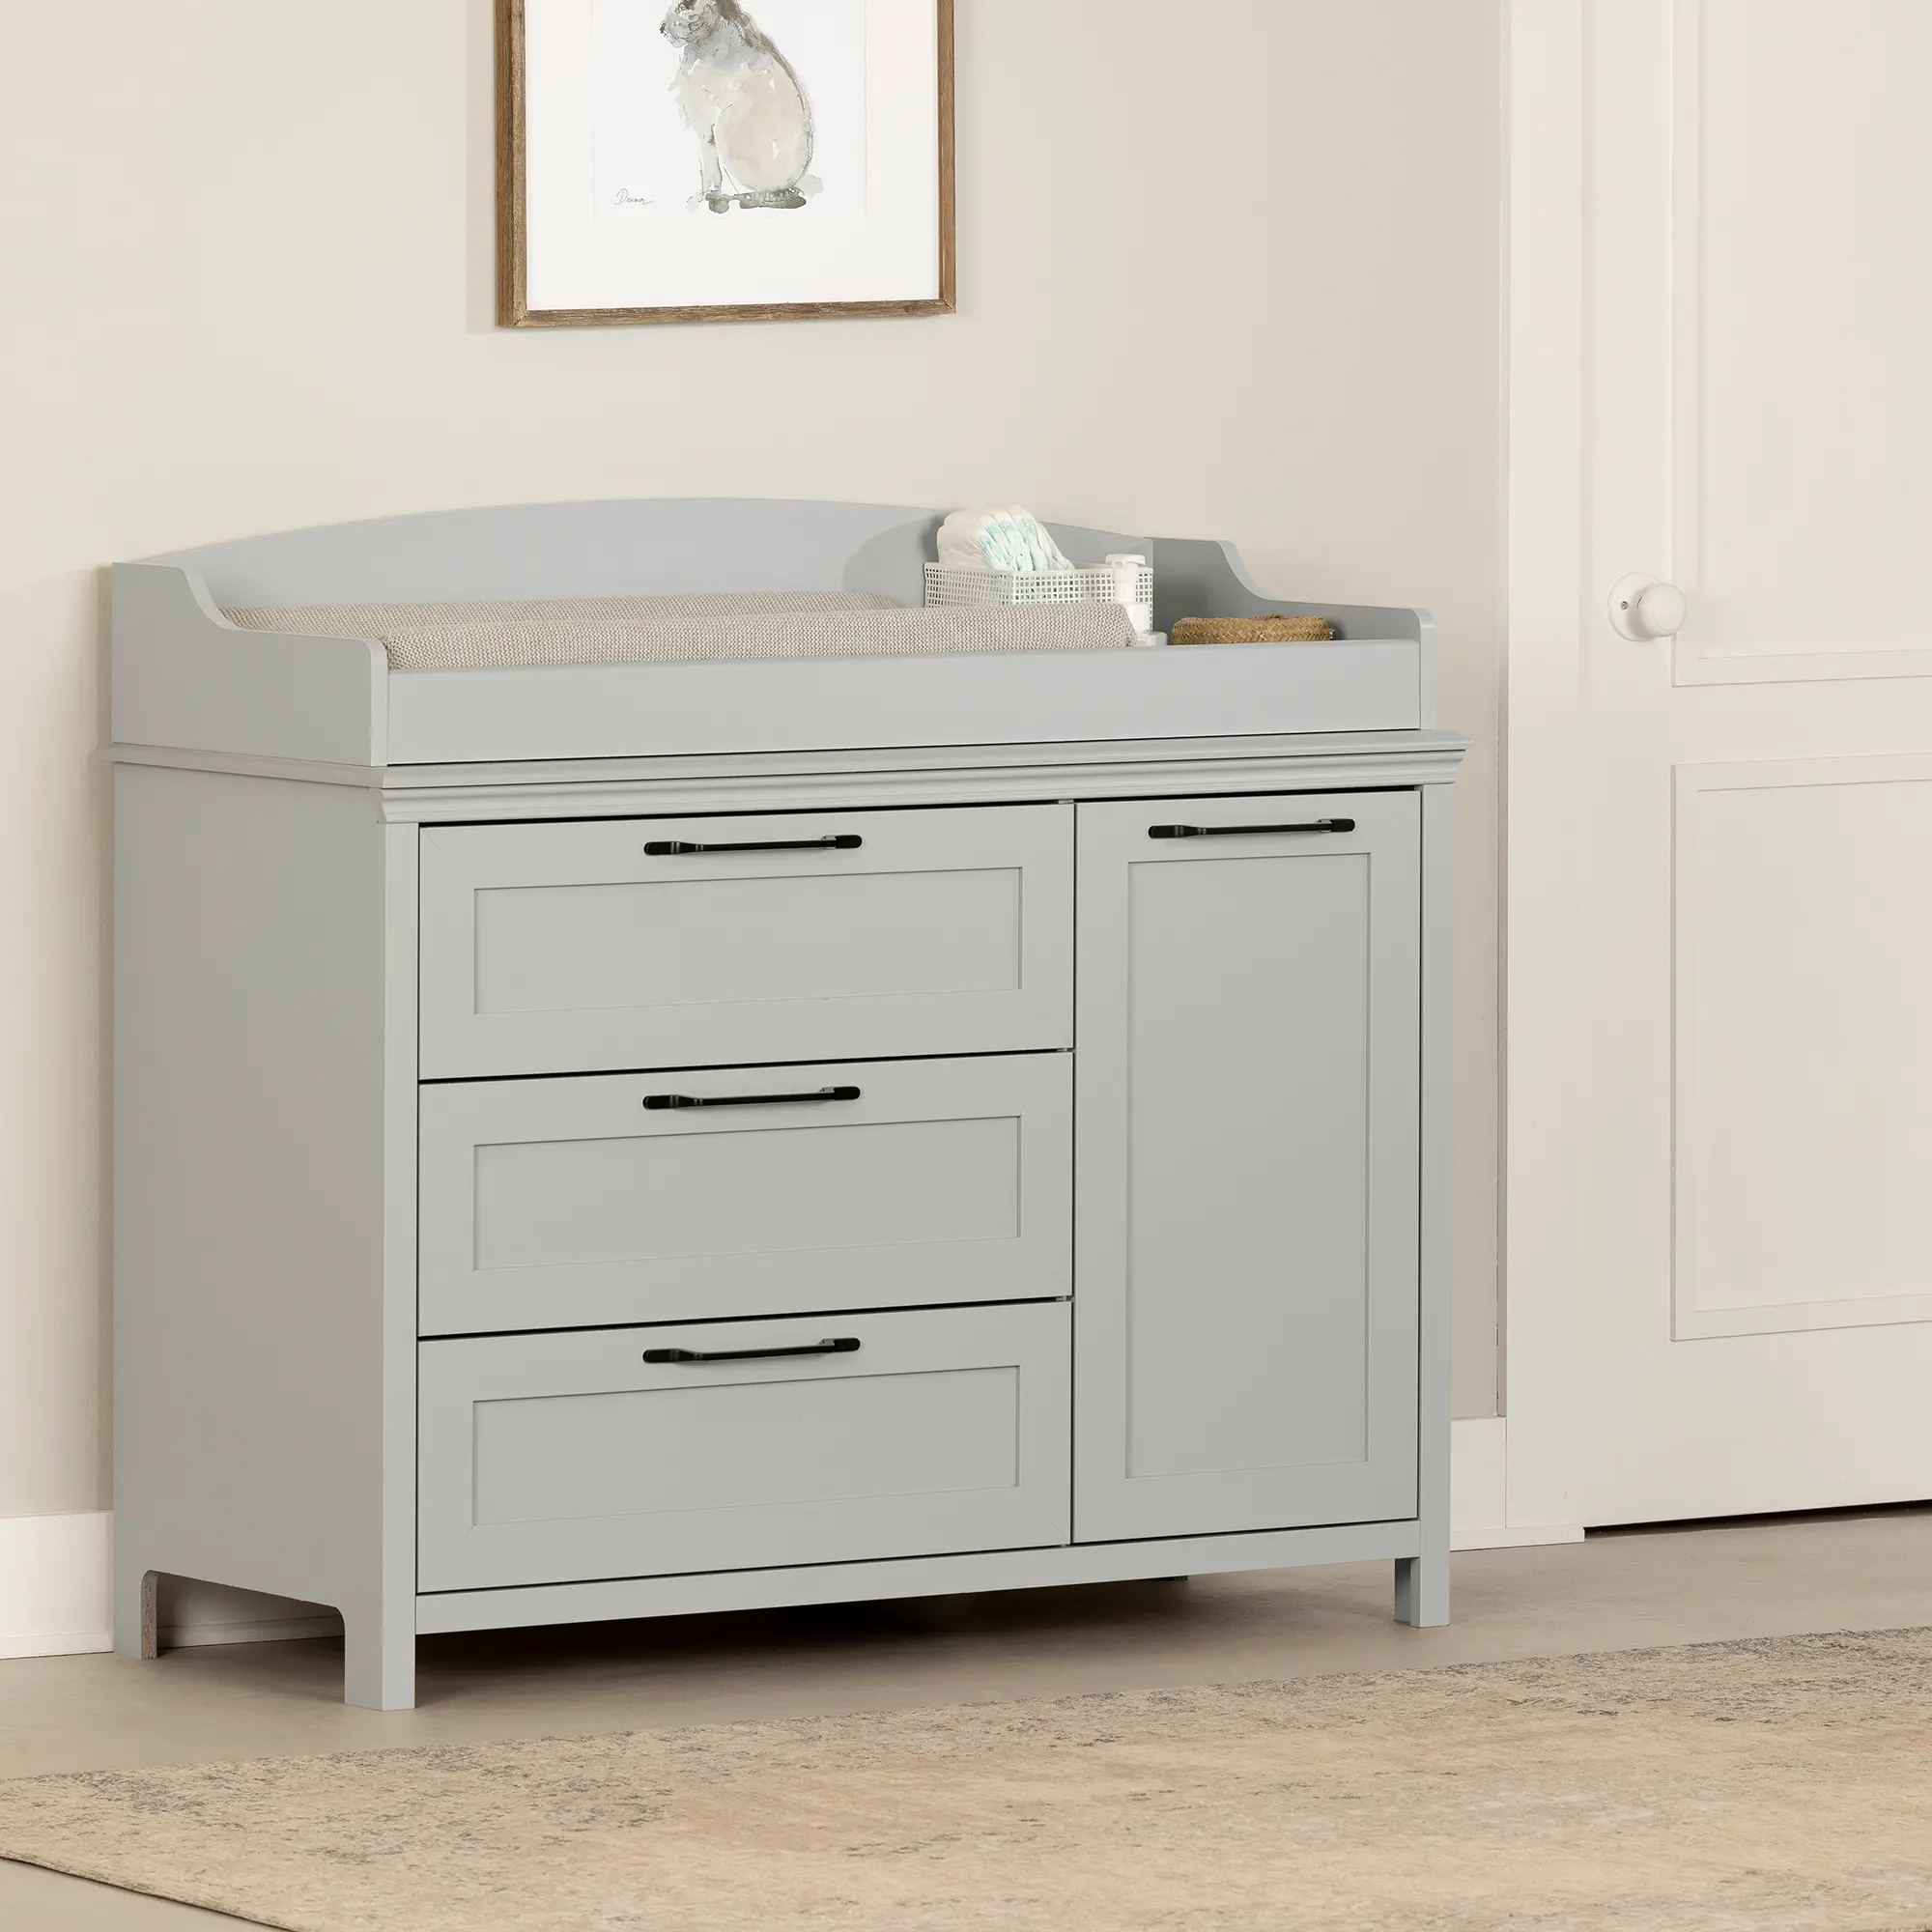 Daisie Gray Changing Table - South Shore